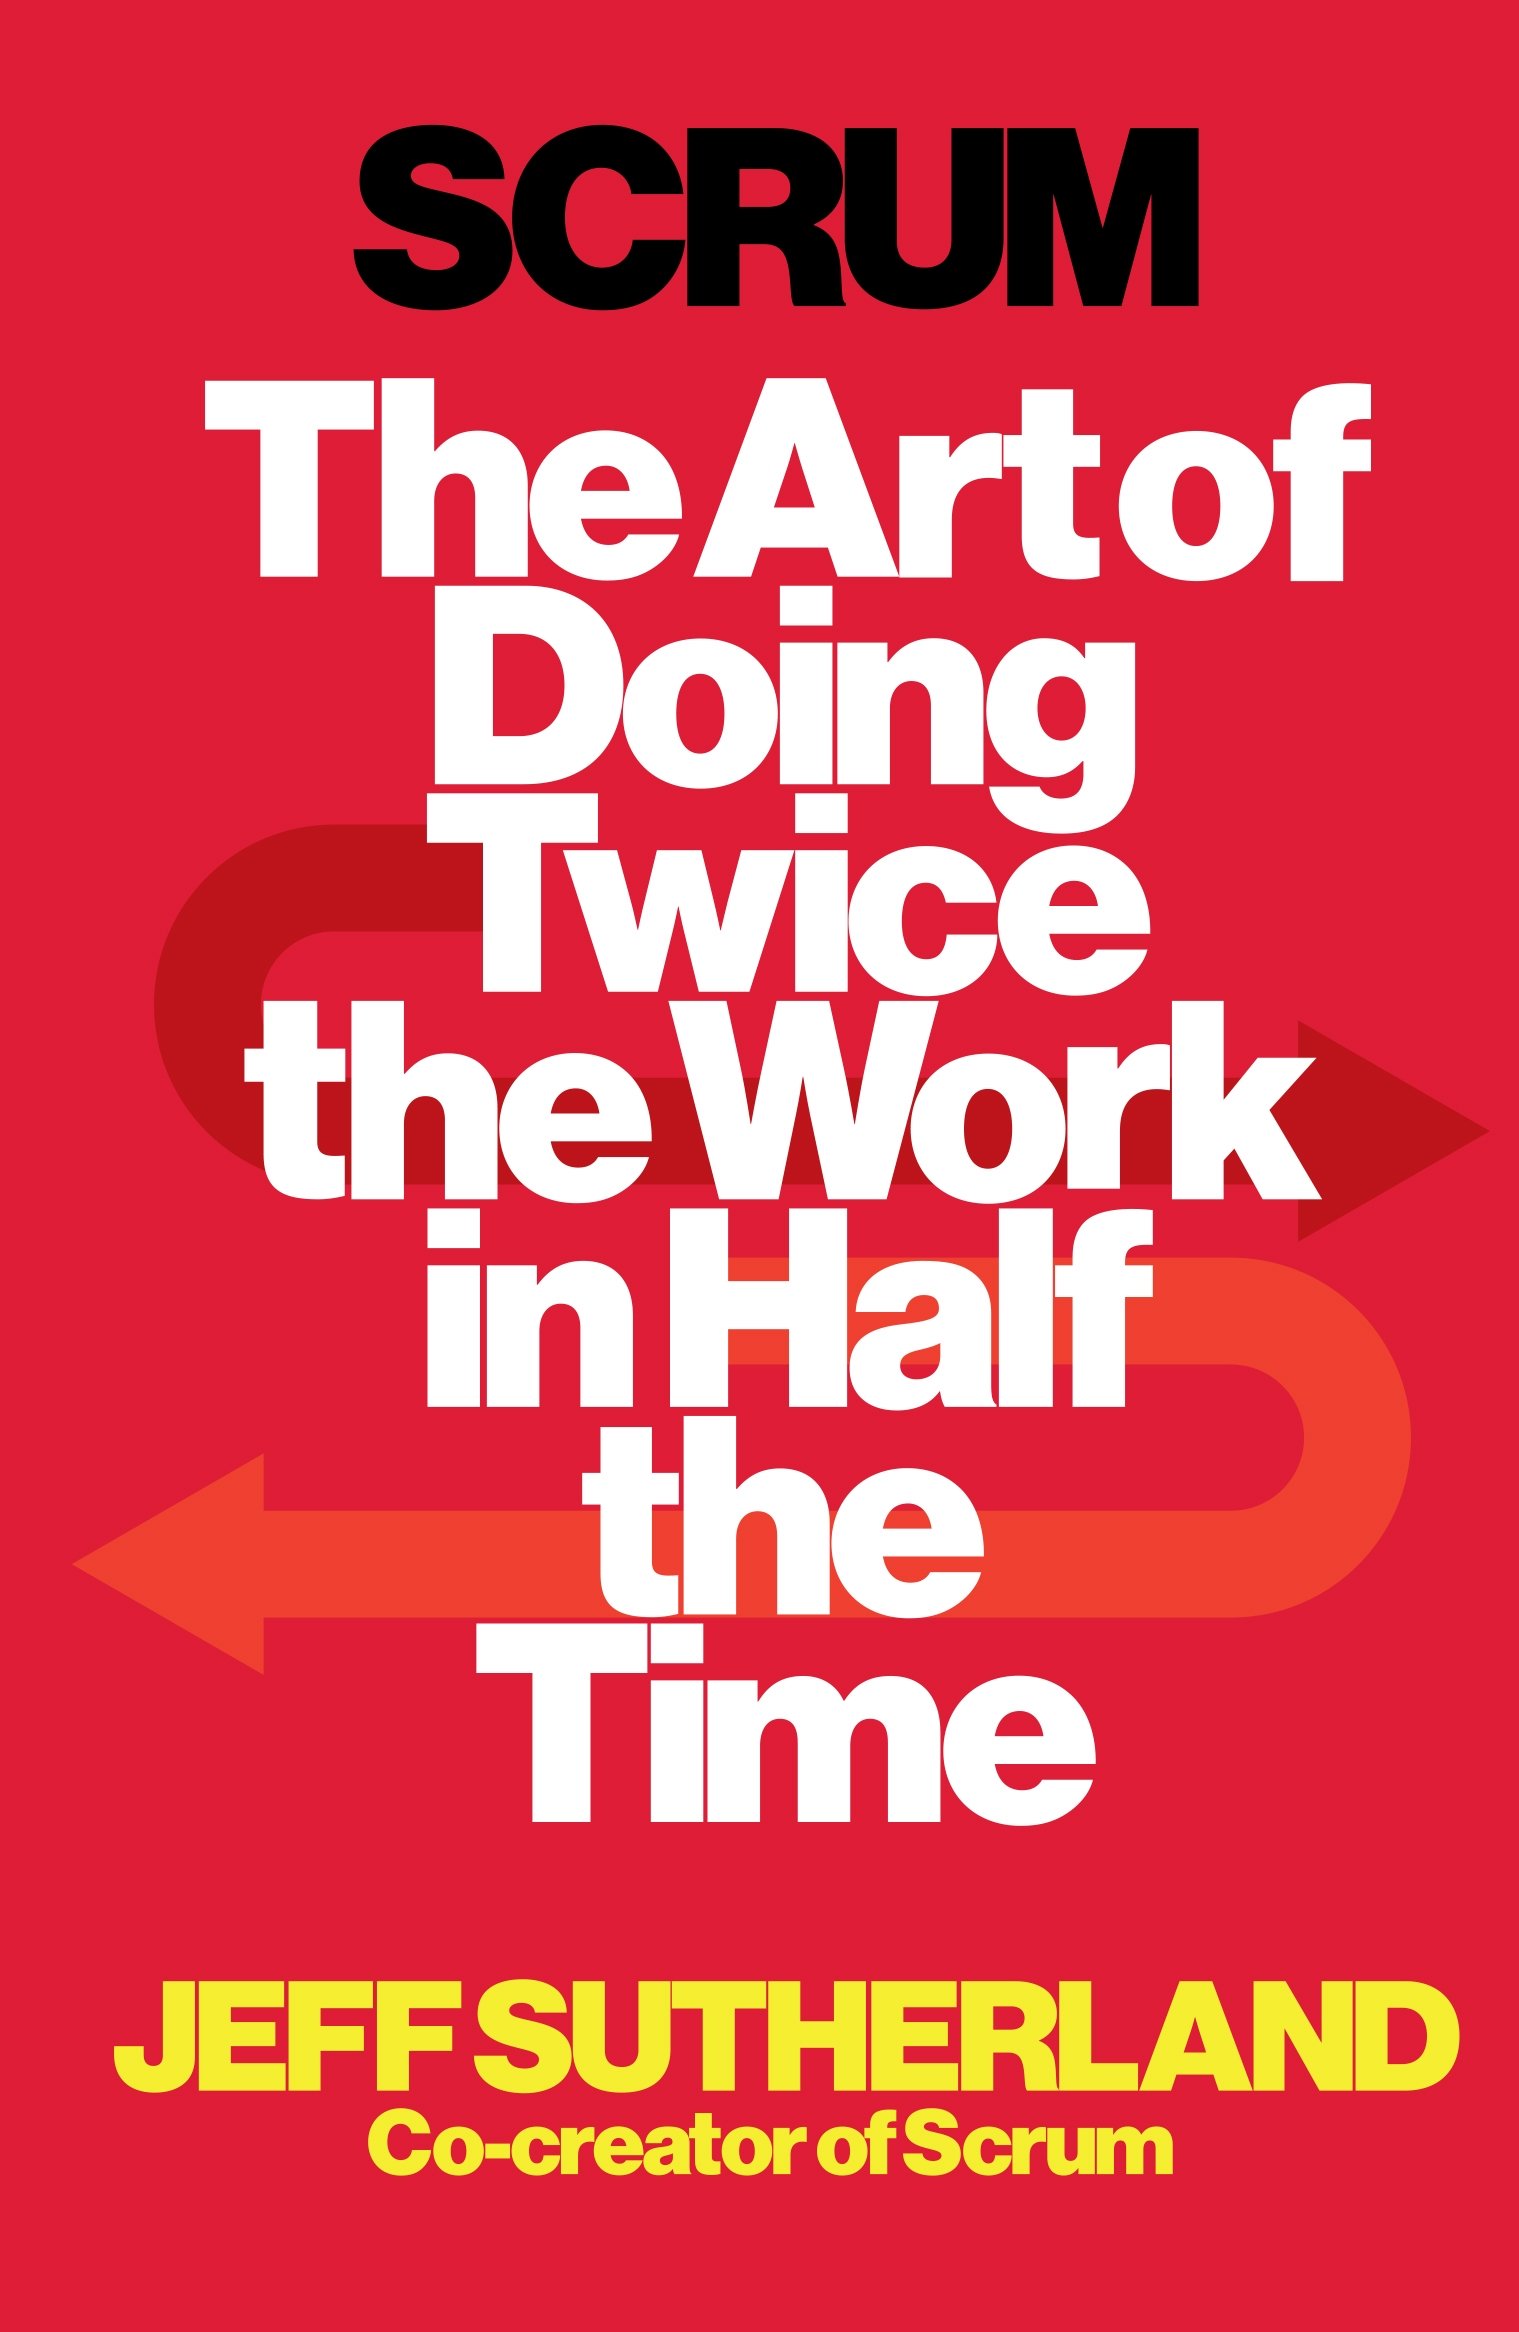 Book Review: Scrum: The Art of Doing Twice the Work in Half the Time by Jeff Sutherland